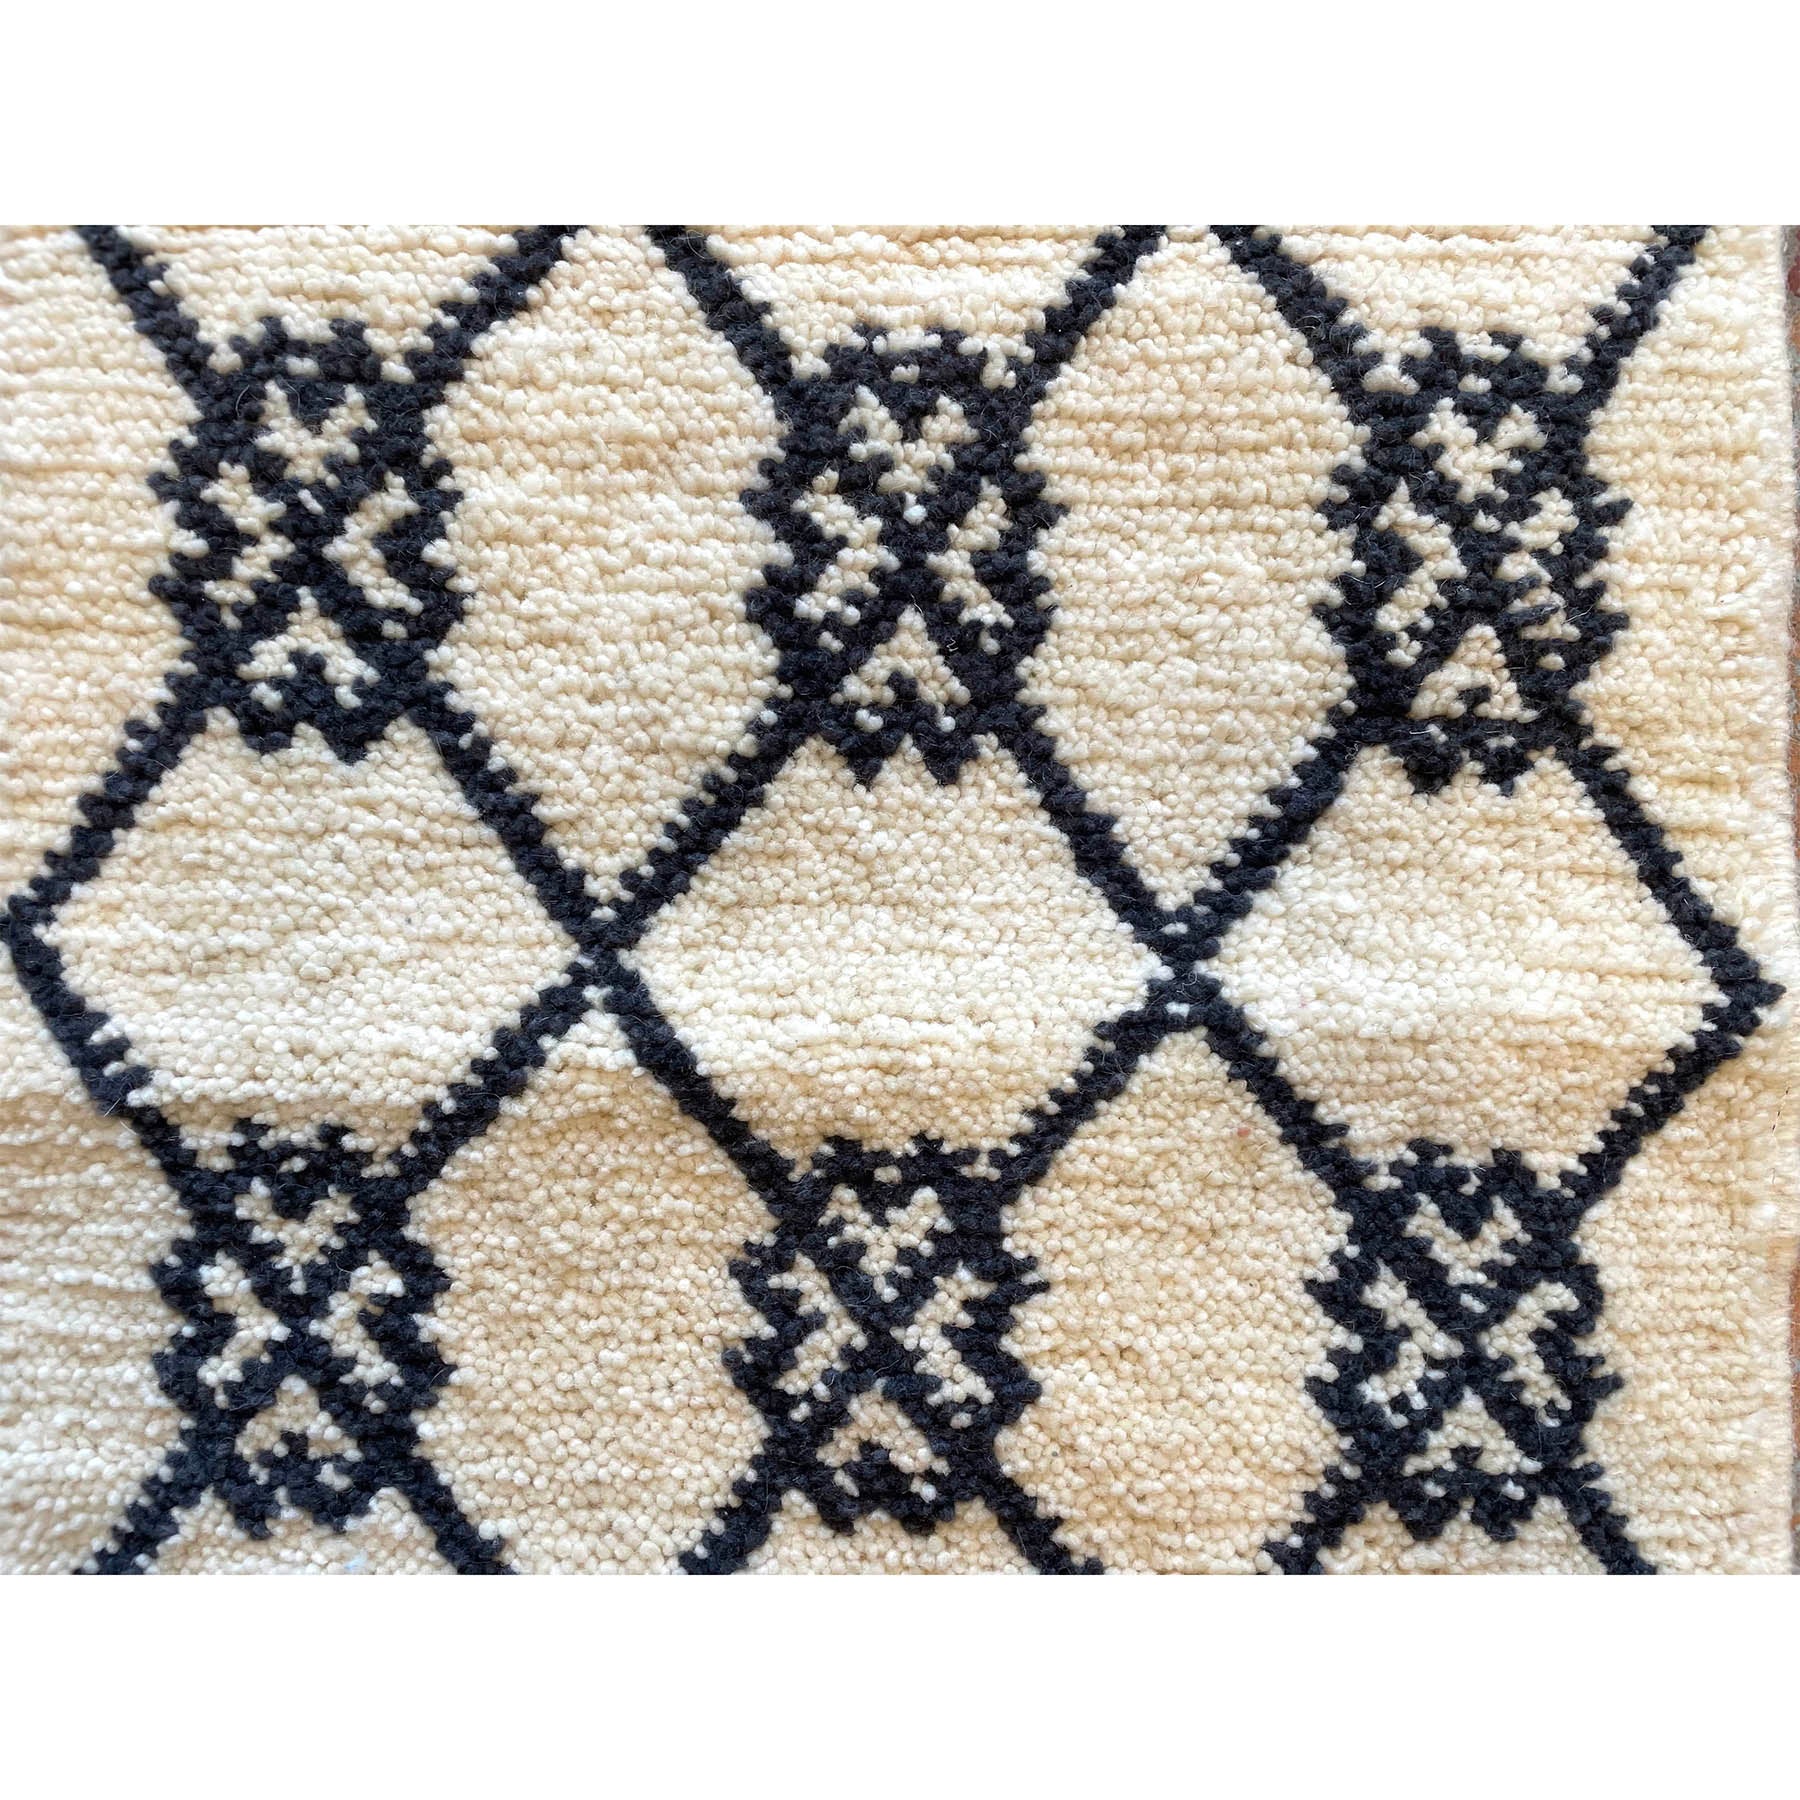 Classic white and black Moroccan trellis rug with geometric details - Kantara | Moroccan Rugs